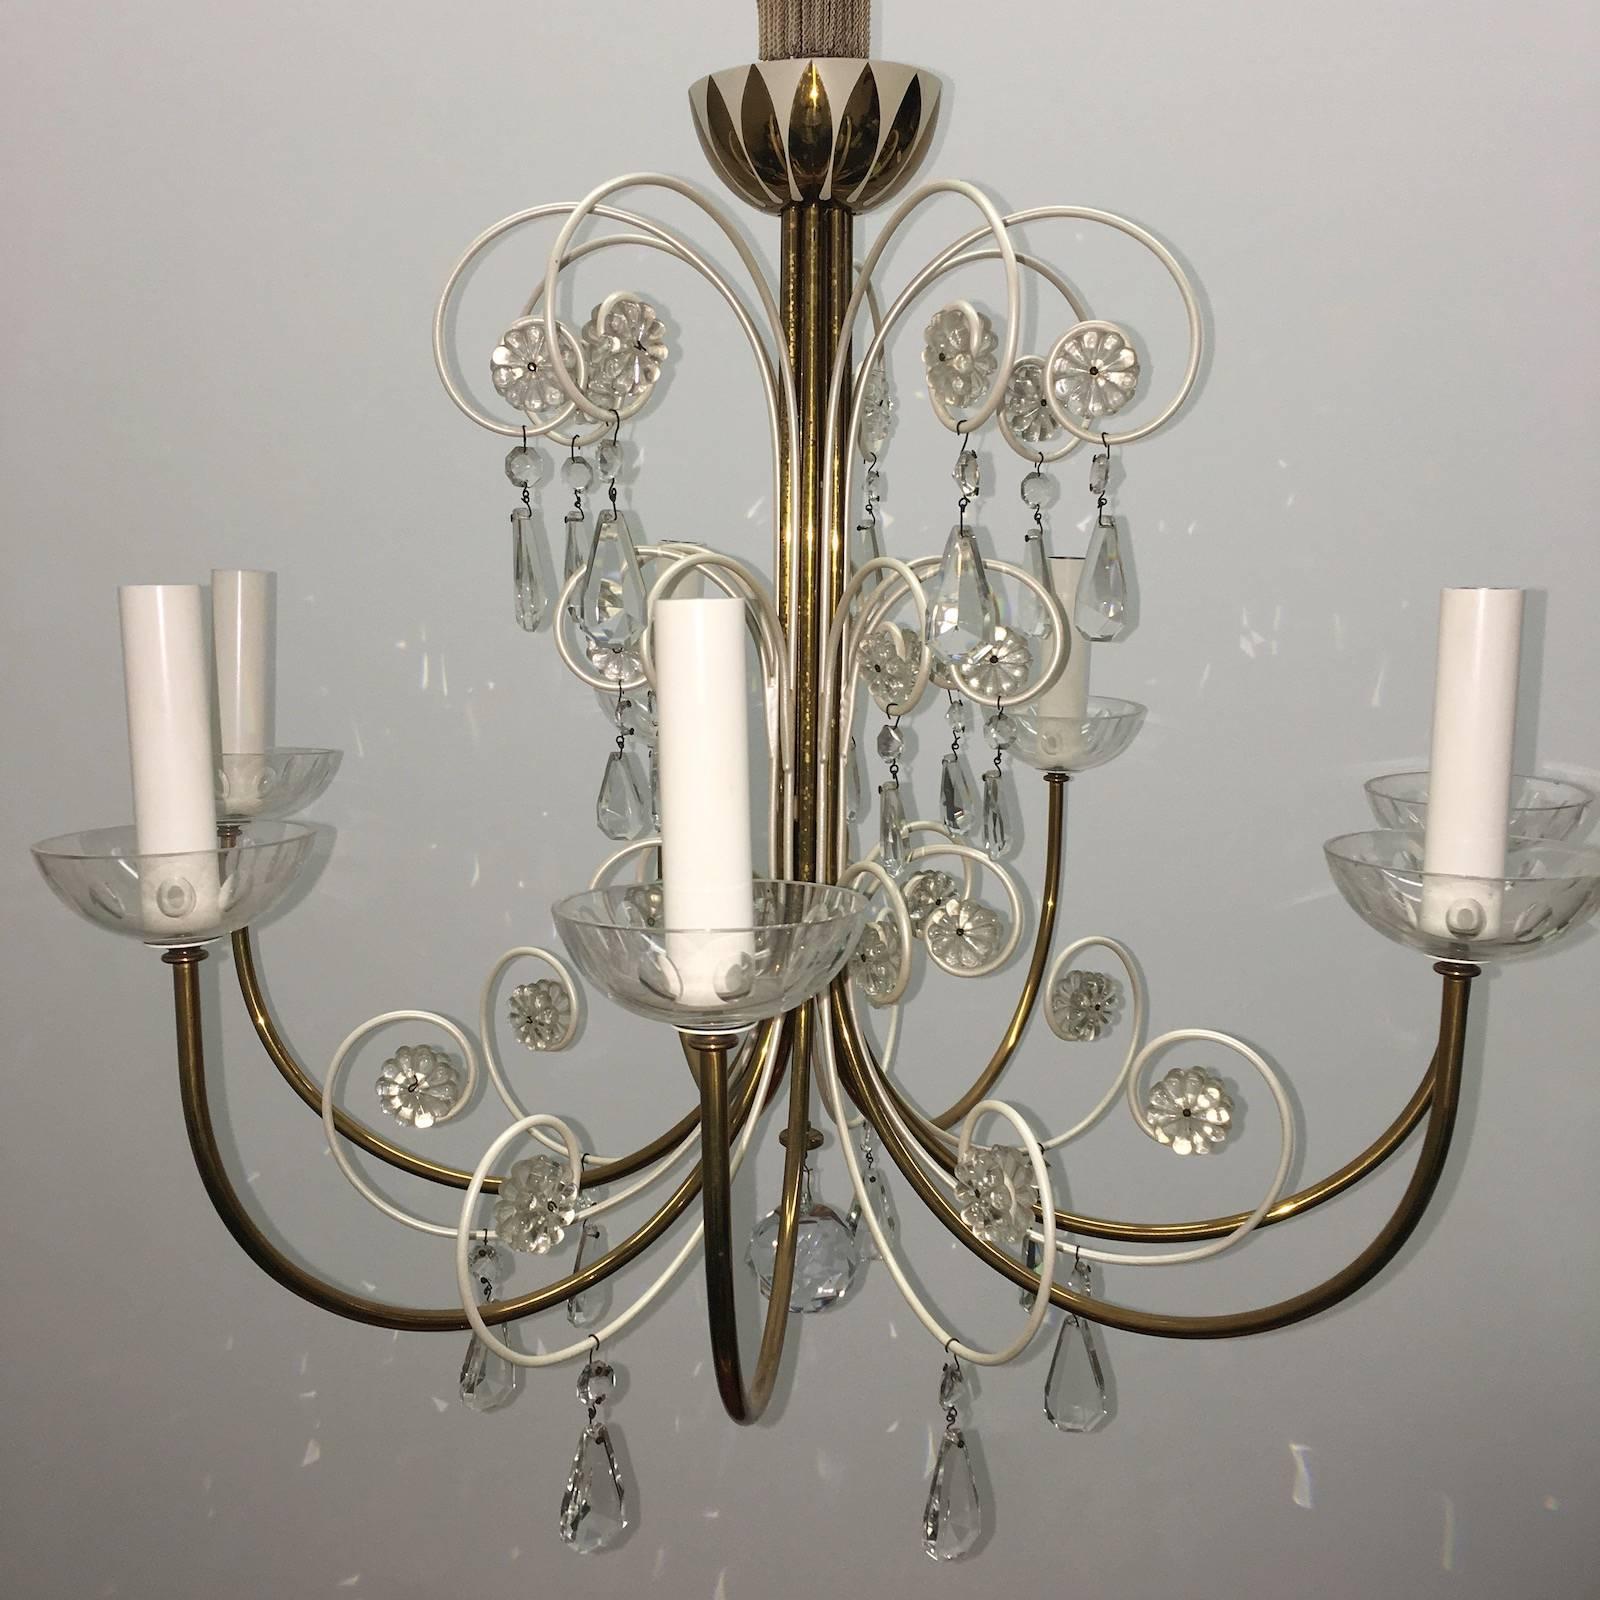 A beautiful chandelier in the form of a fountain. Attributed to Emil Stejnar for Rupert Nikoll, Vienna, Austria. An original vintage piece manufactured in Mid-Century (1950s-1960s). It is made of brass, white enameled Metal and hand-cut crystals. It